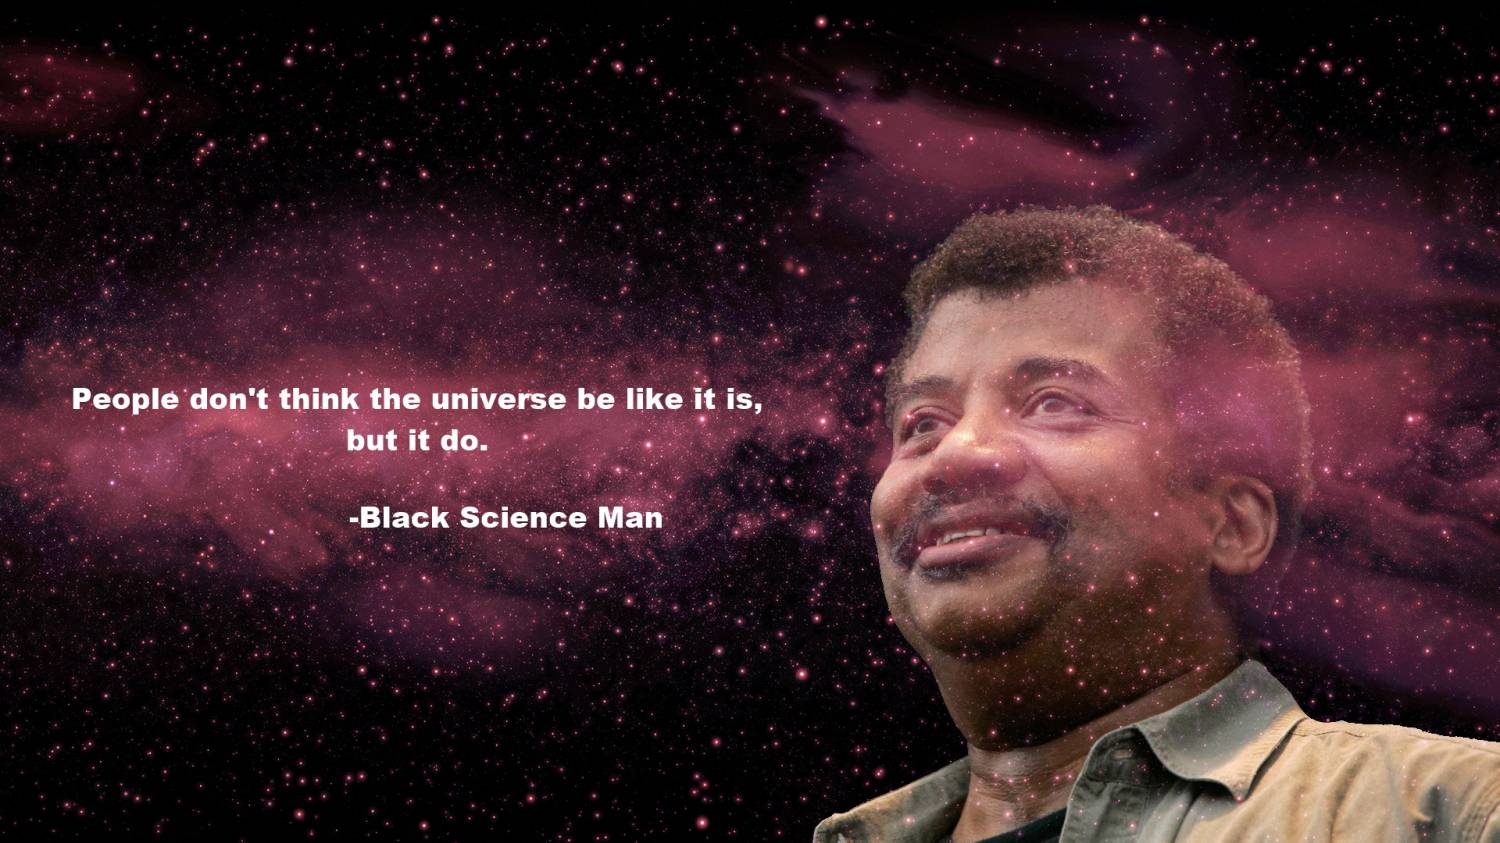 Meme People don't think the univerce be like it is, but I do - Black Science Man